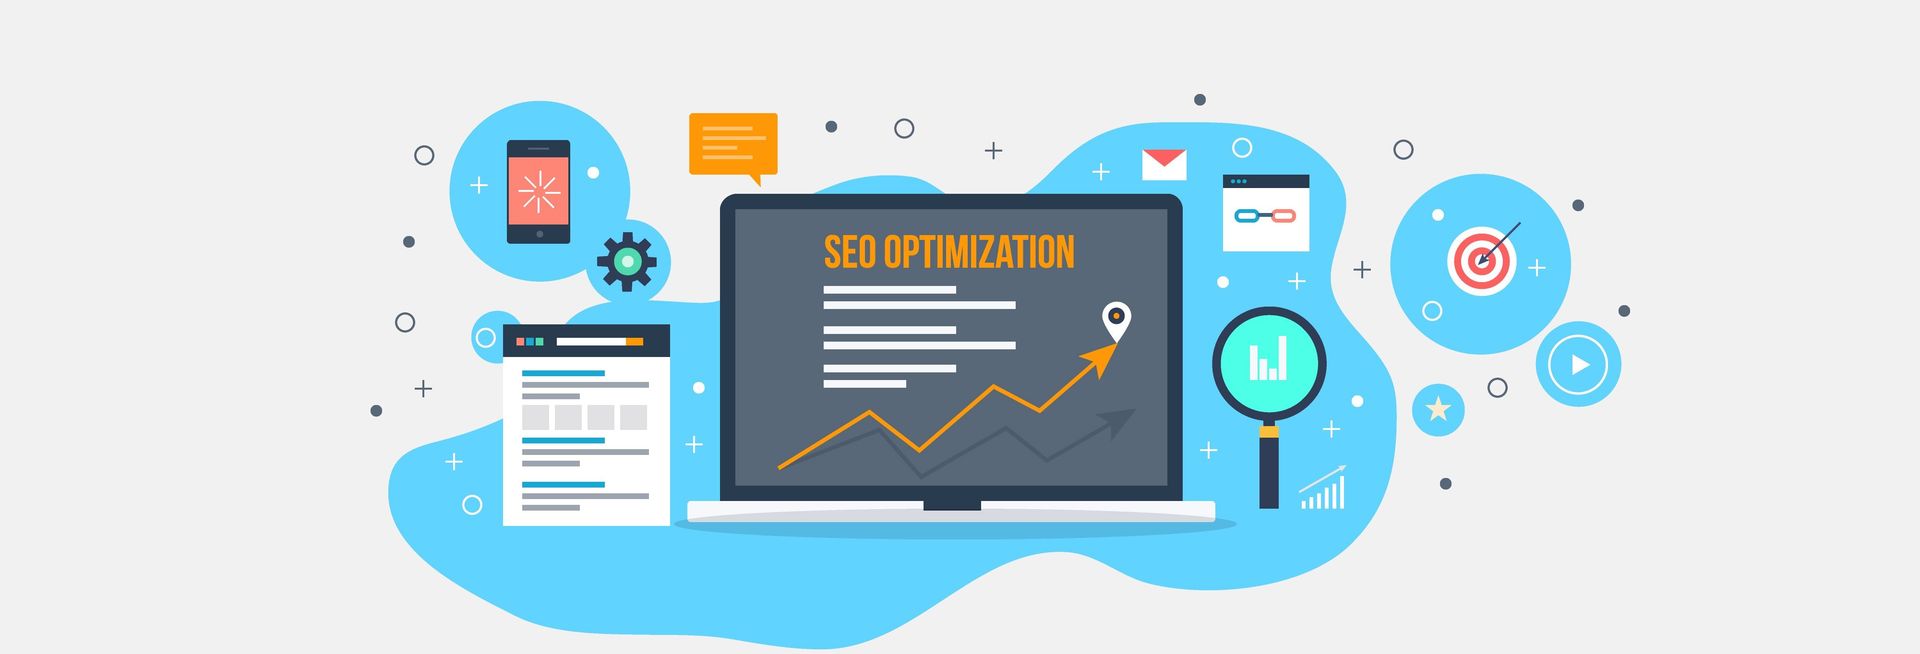 6 Steps to Developing an SEO Strategy & Organic Website Traffic Growth